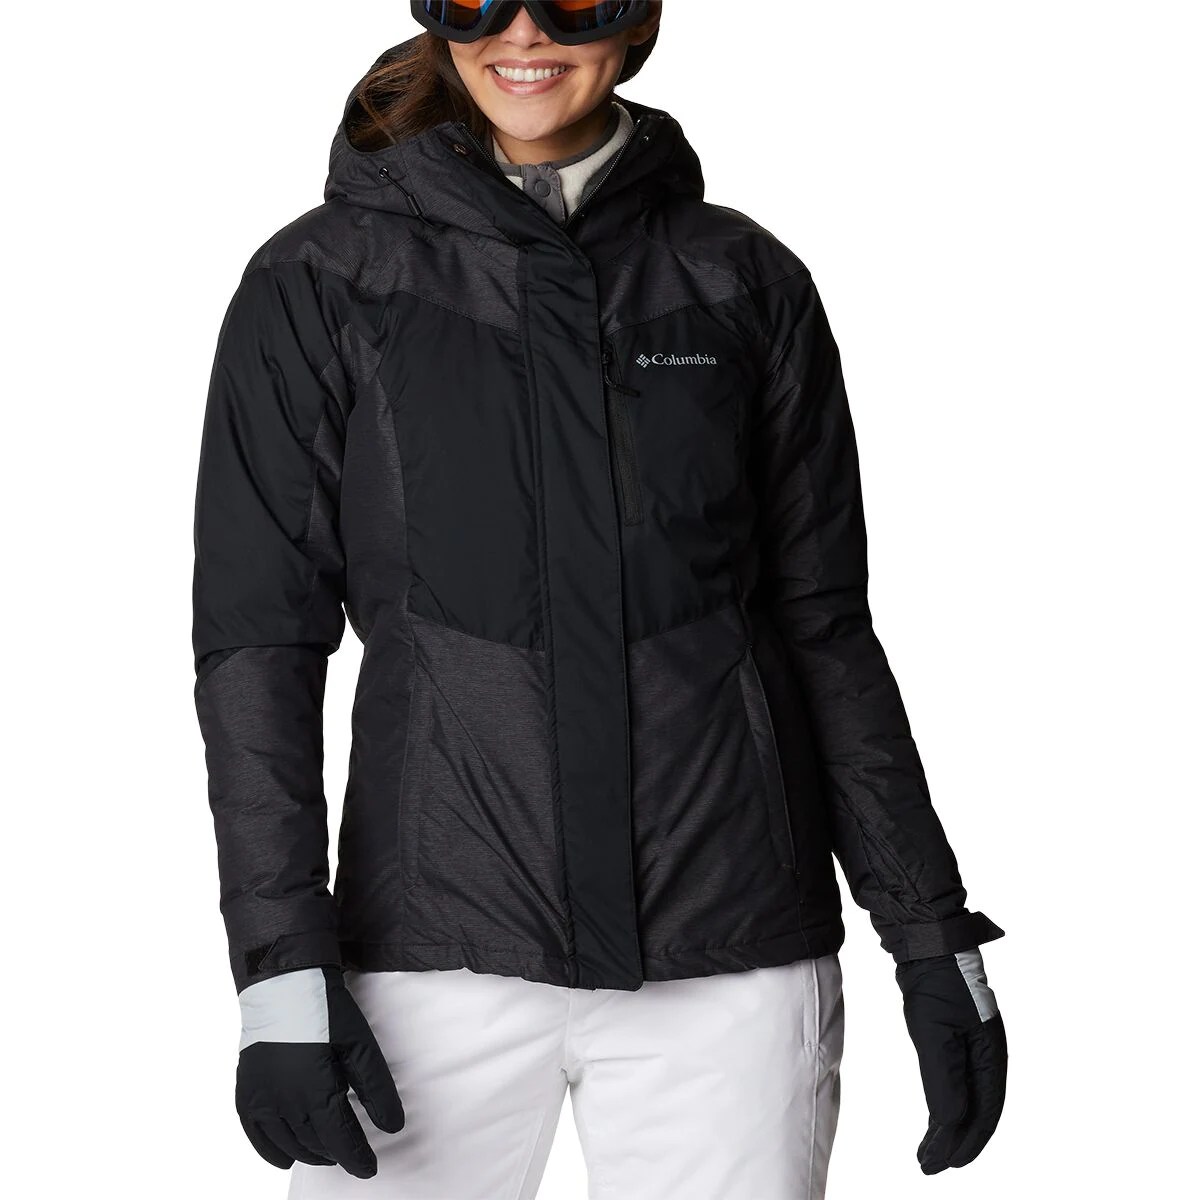 model wearing black rosie run winter jacket by columbia which is on sale at backcountry